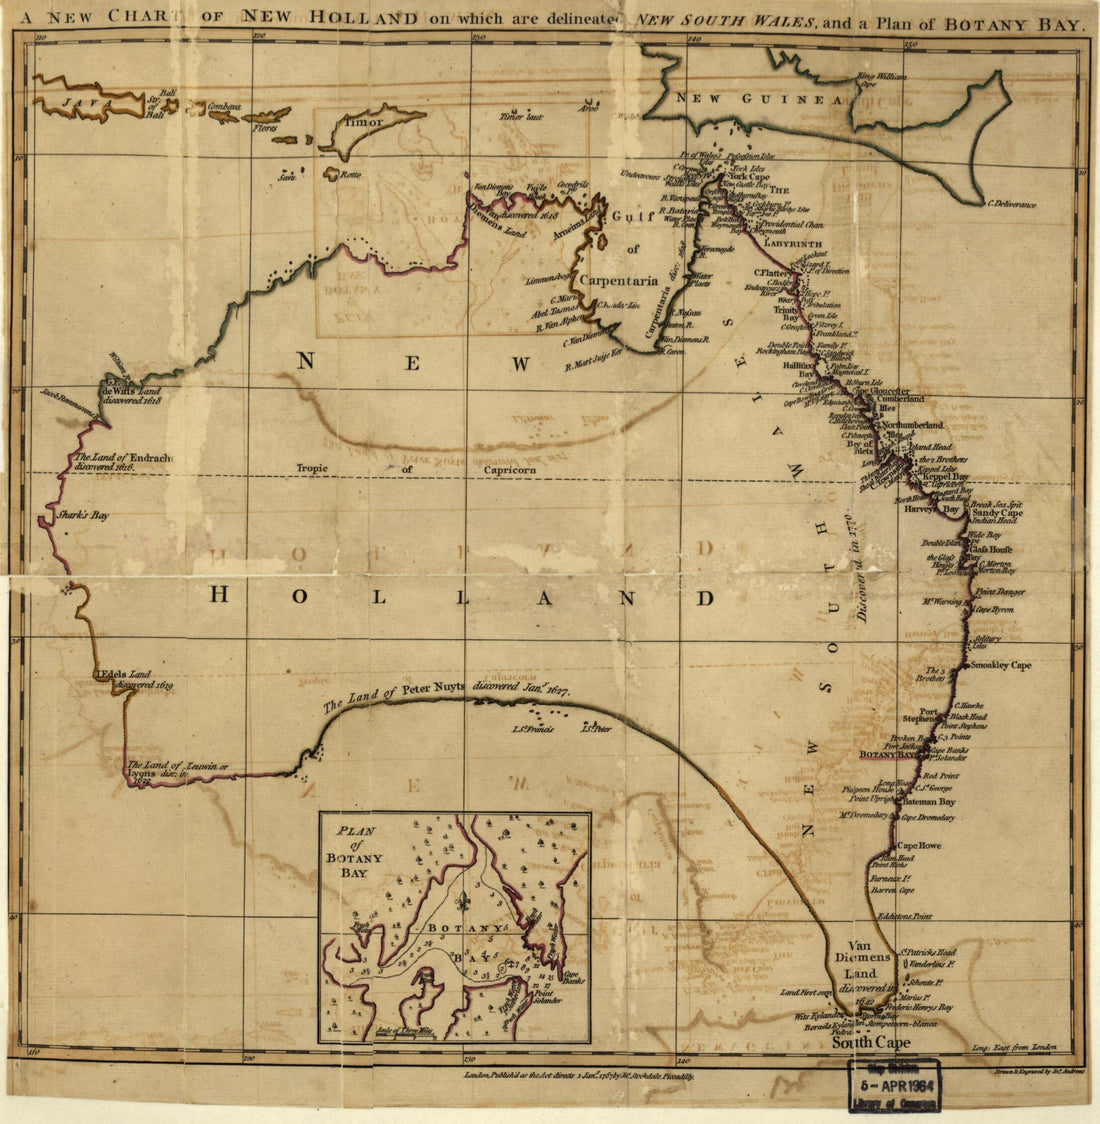 This old map of A New Chart of New Holland On Which Are Delineated New South Wale, and a Plan for Botany Bay from 1767 was created by John Stockdale in 1767